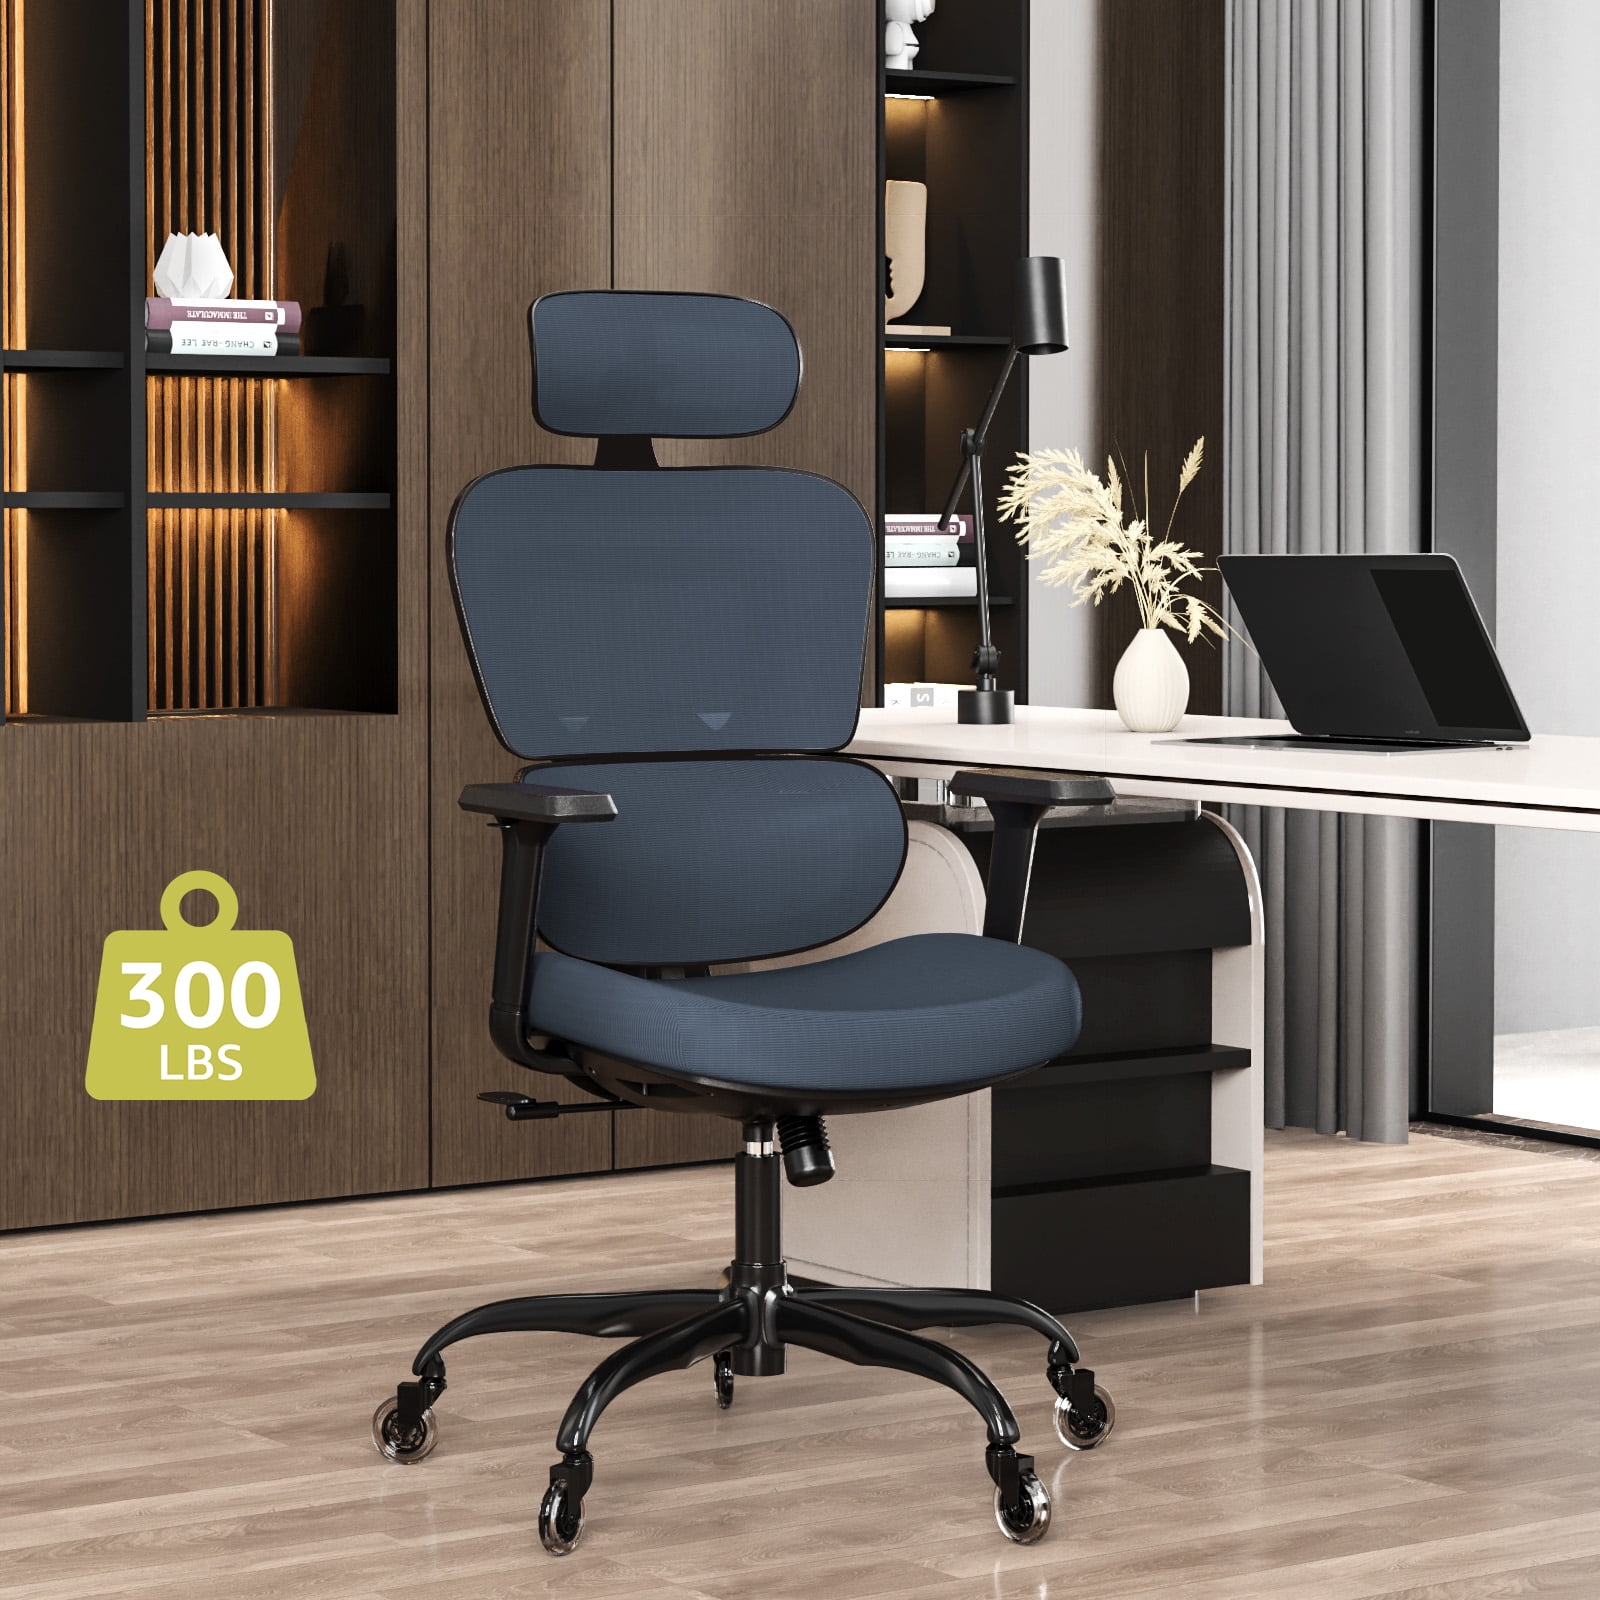 Desk　Leather　Office　Office　LIOONS　Seat　Chairpu　Comfort　Chair　Chai-